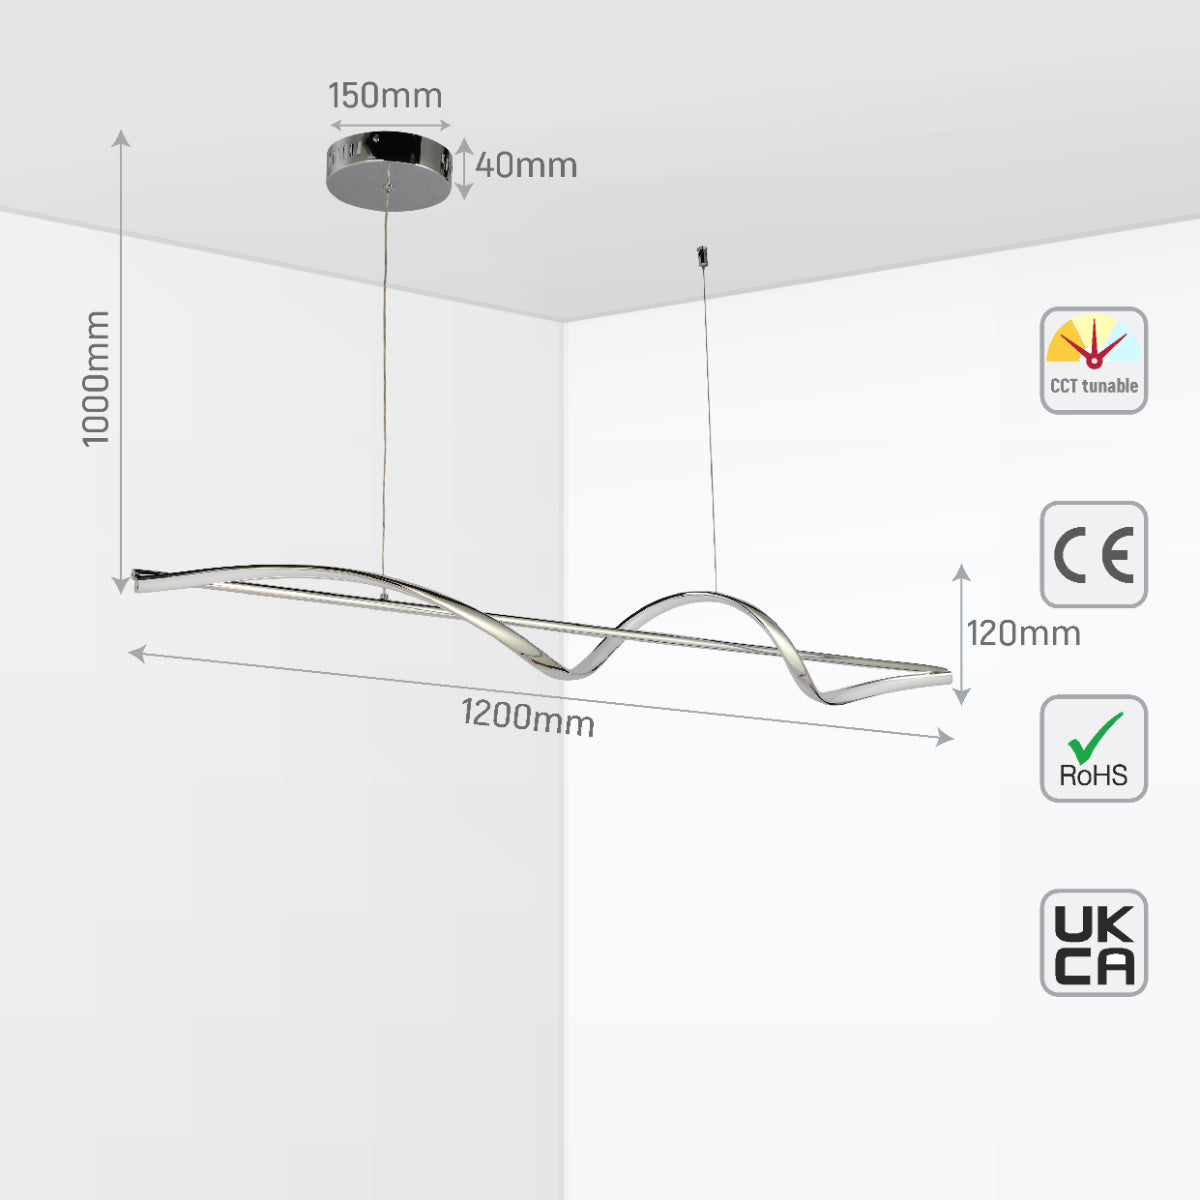 Size and certifications of Modern Sleek Infinity Wave LED Pendant Light 159-18140